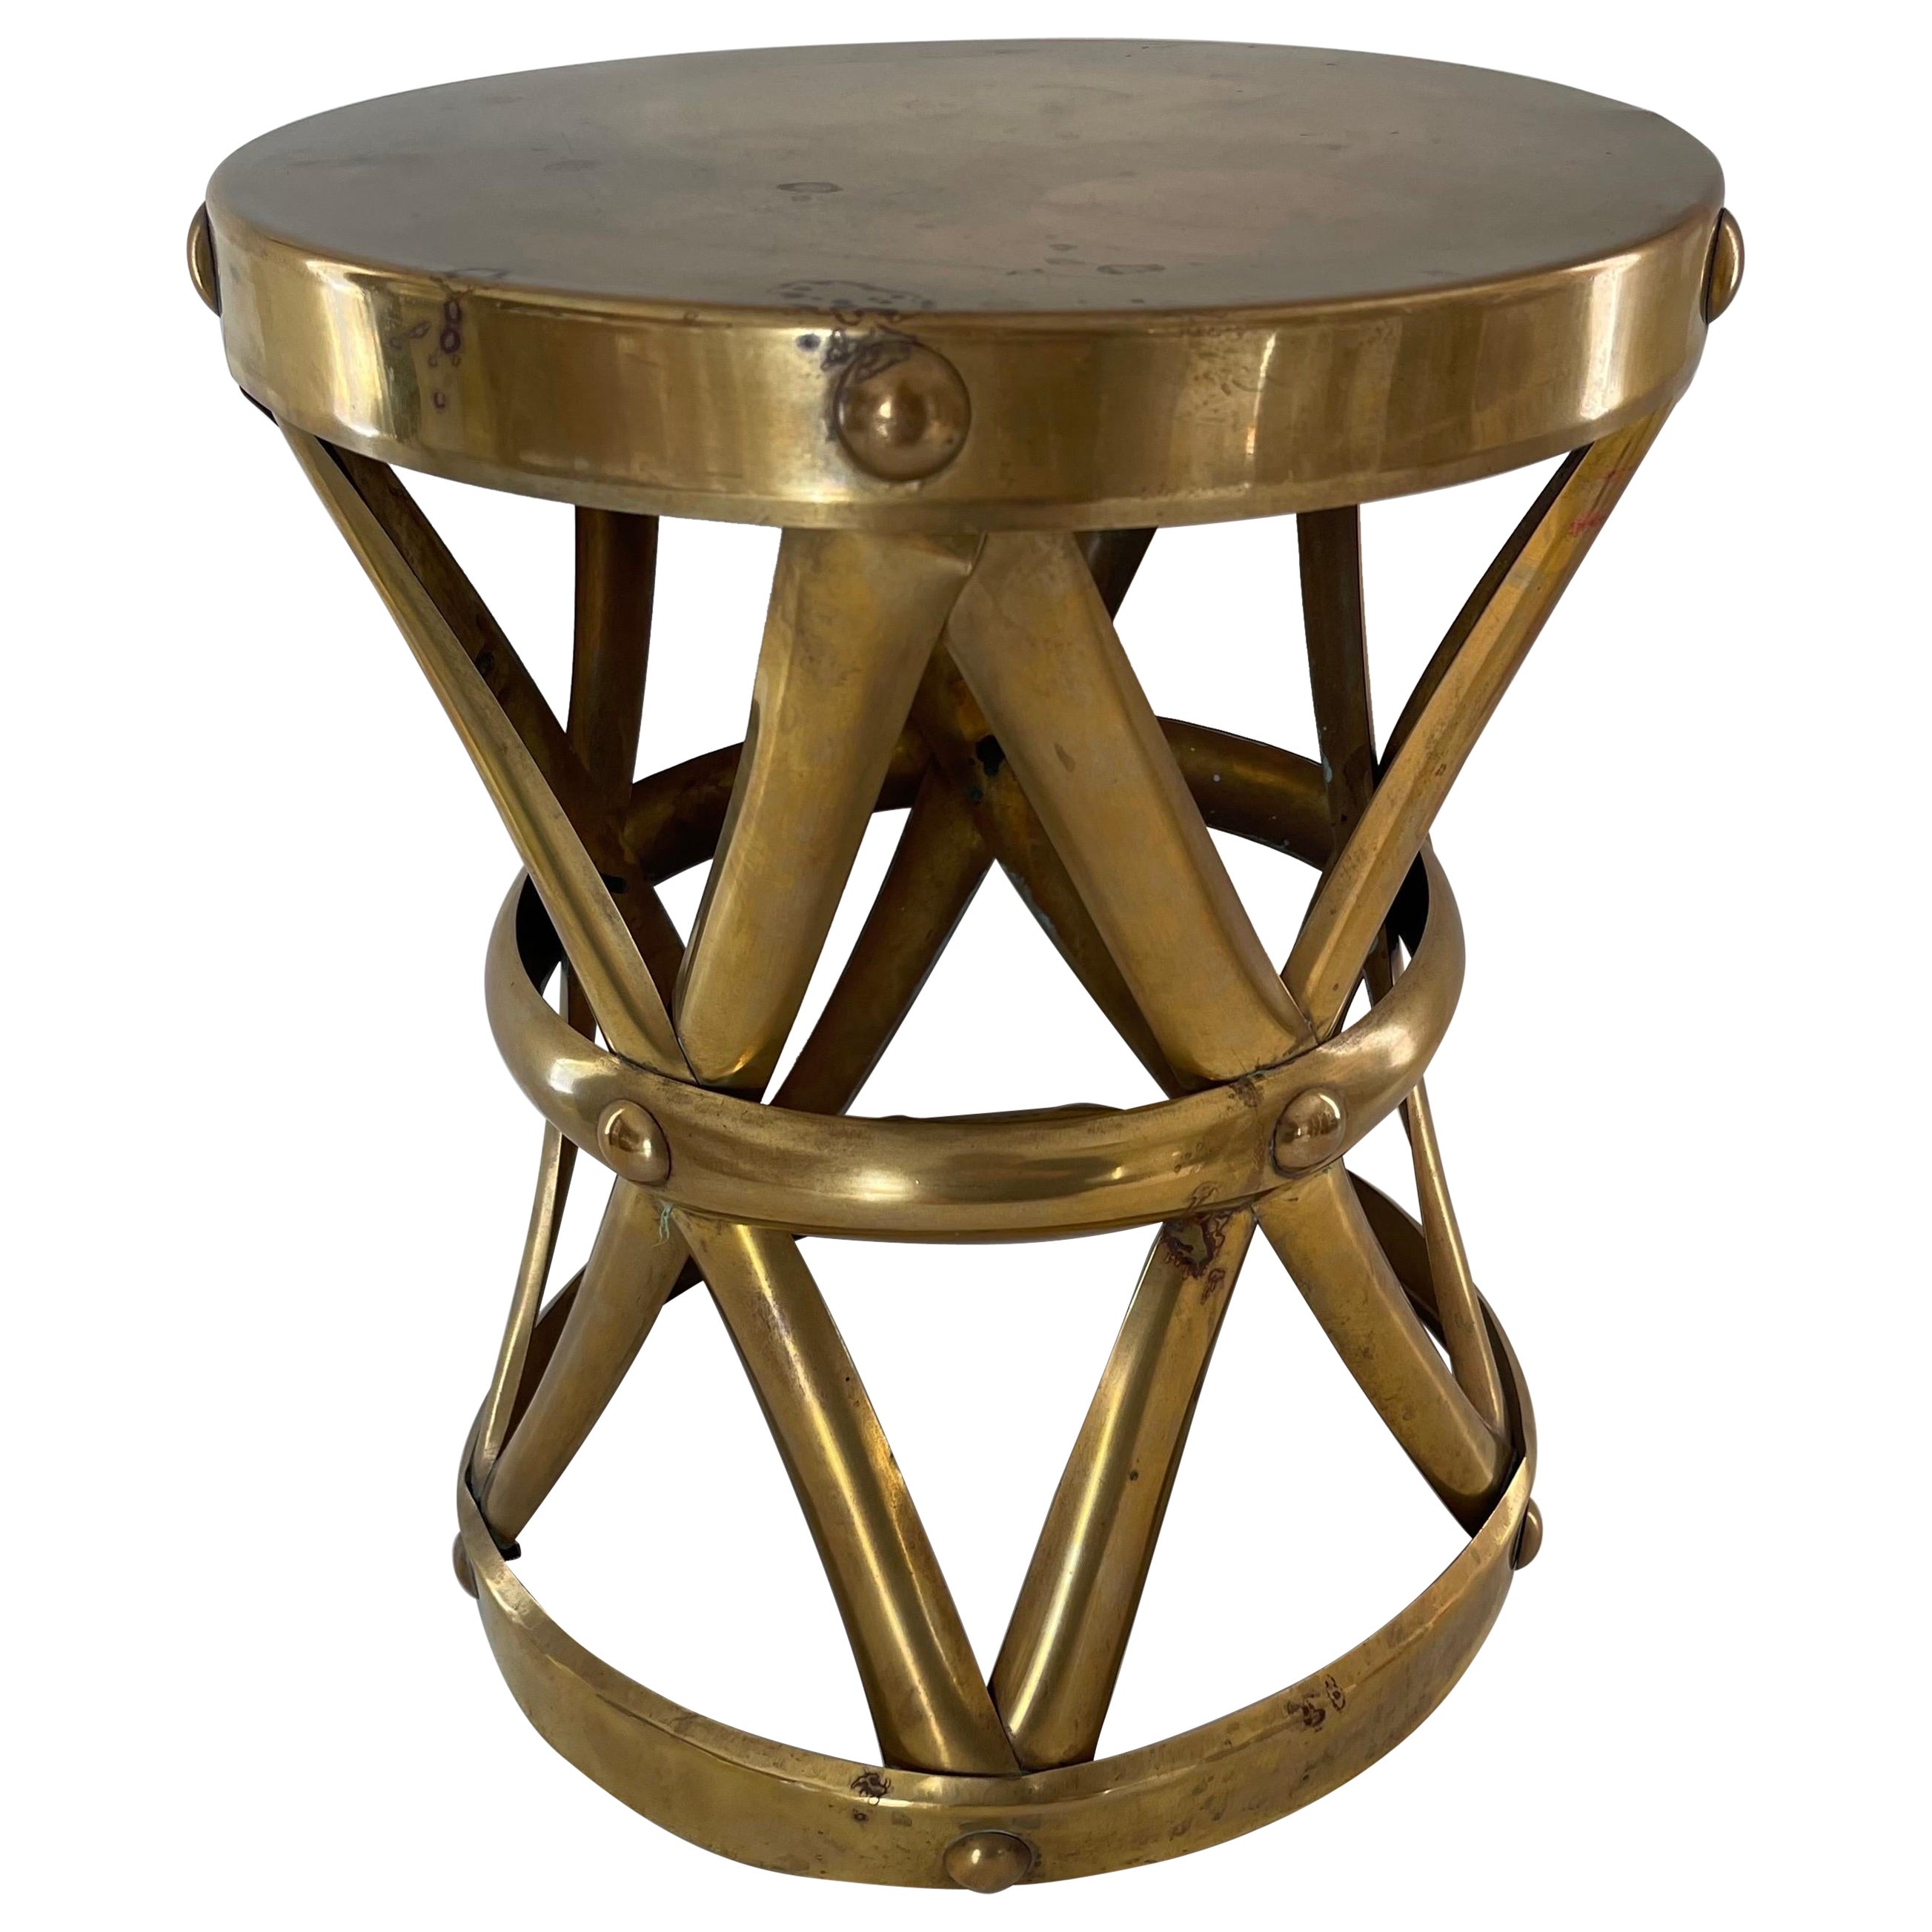 1970s Brass Tabouret Stool or Side Table